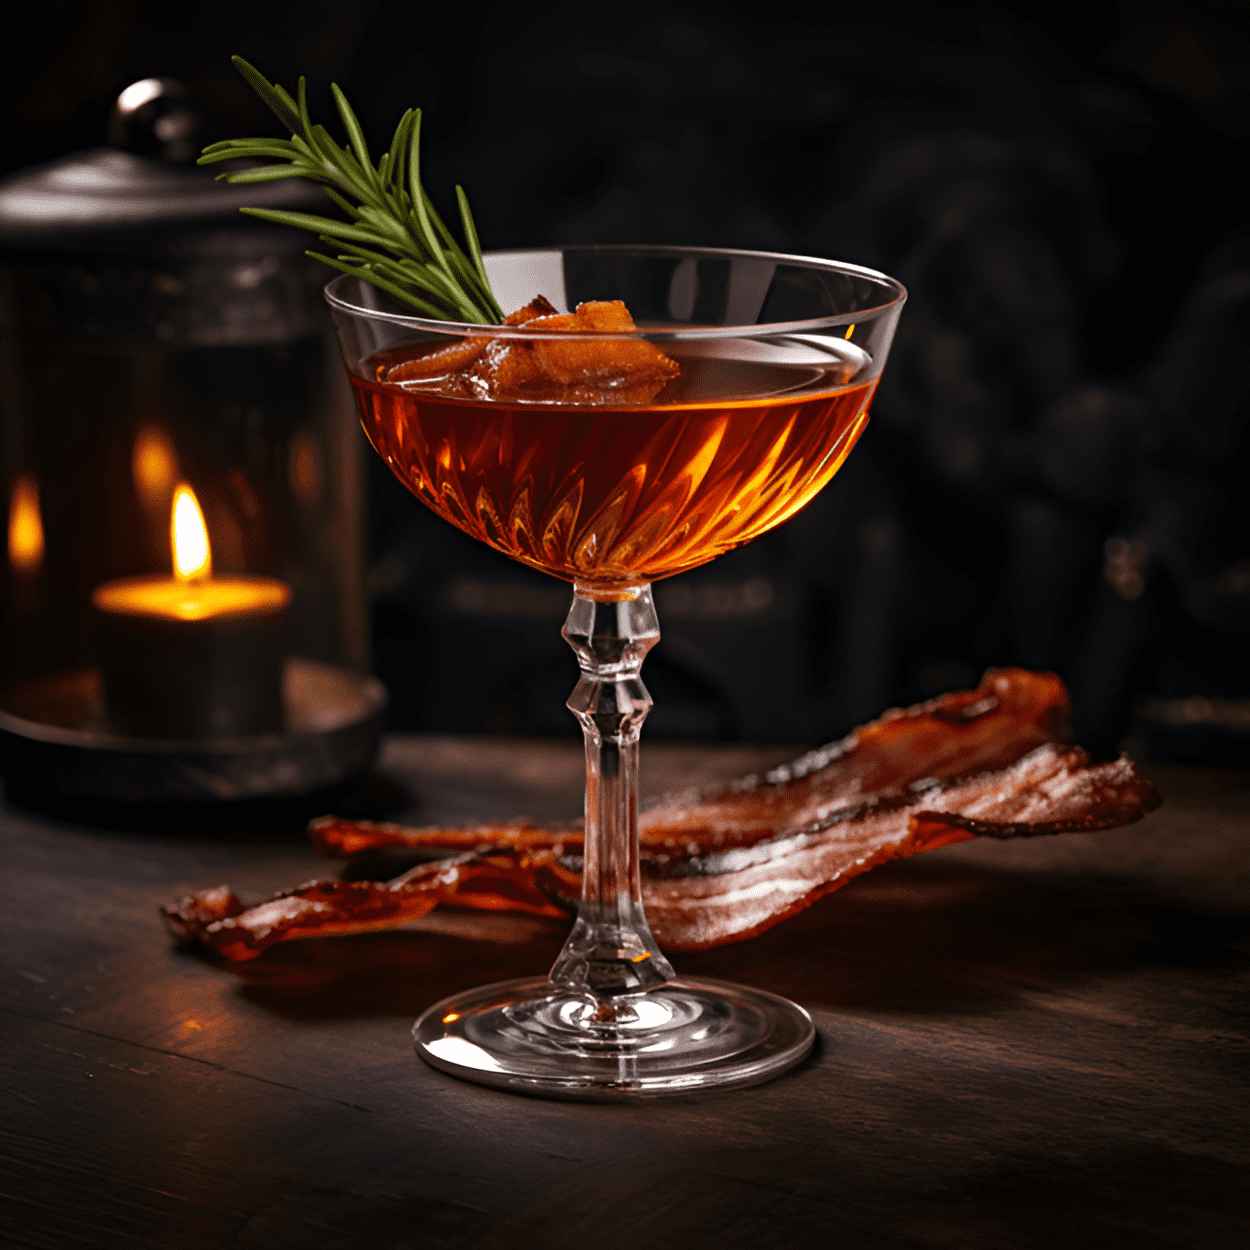 Carnivore Electrolyte Cocktail Recipe - This cocktail is a savory delight. It has a strong, meaty flavor with a hint of saltiness. The taste is bold and robust, perfect for those who enjoy a hearty drink.